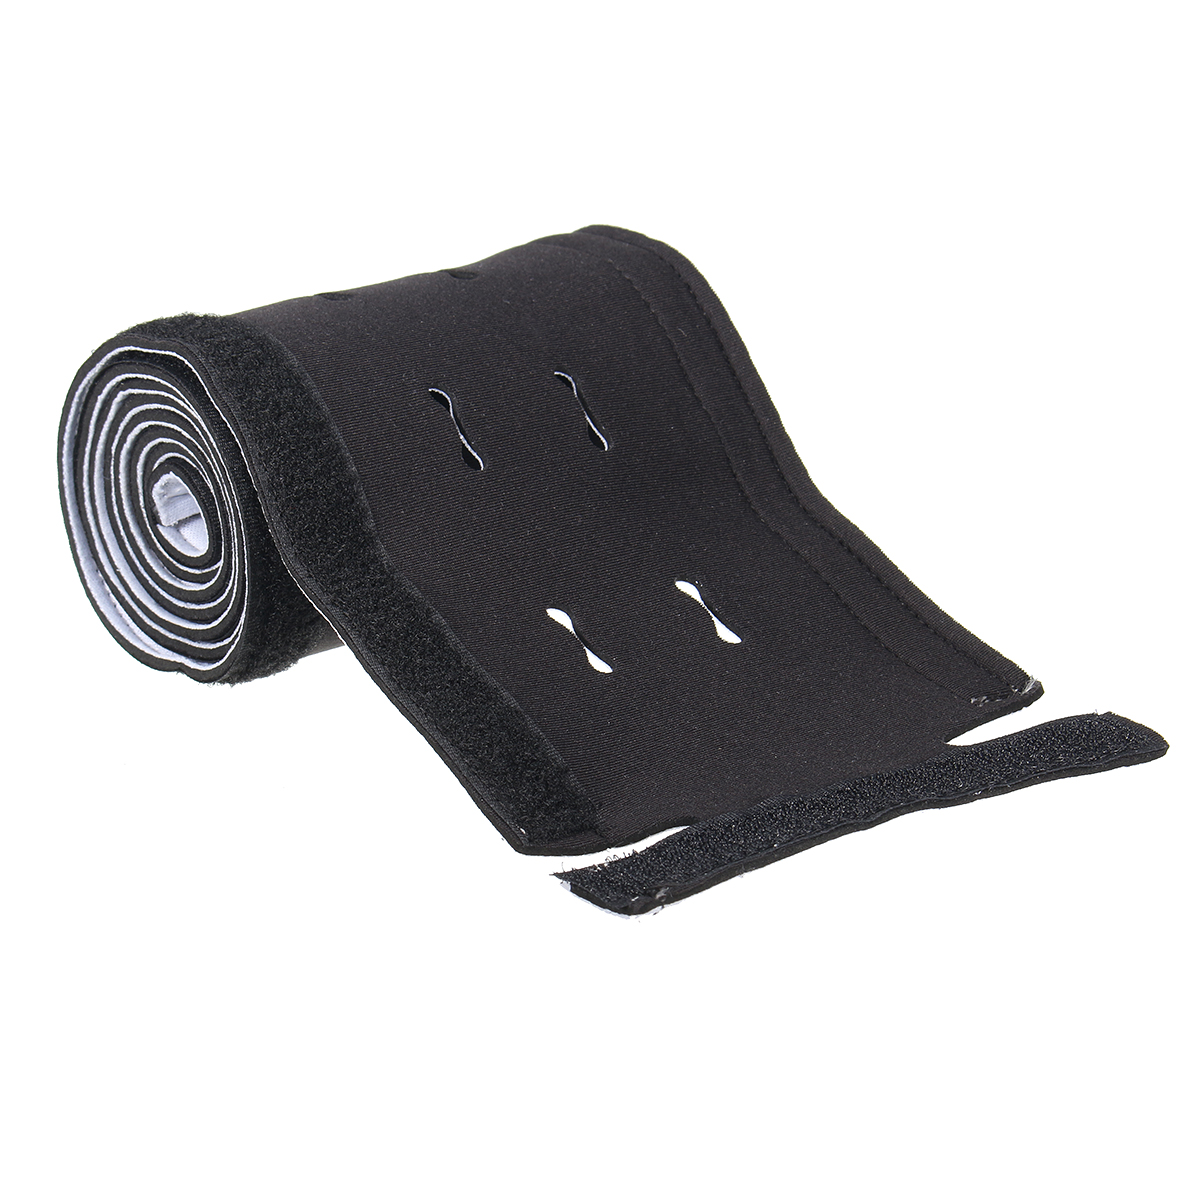 125M-49-Inch-Cable-Management-Sleeve-Flexible-Neoprene-Cable-Organizer-Wrap-For-TV-PC-1160840